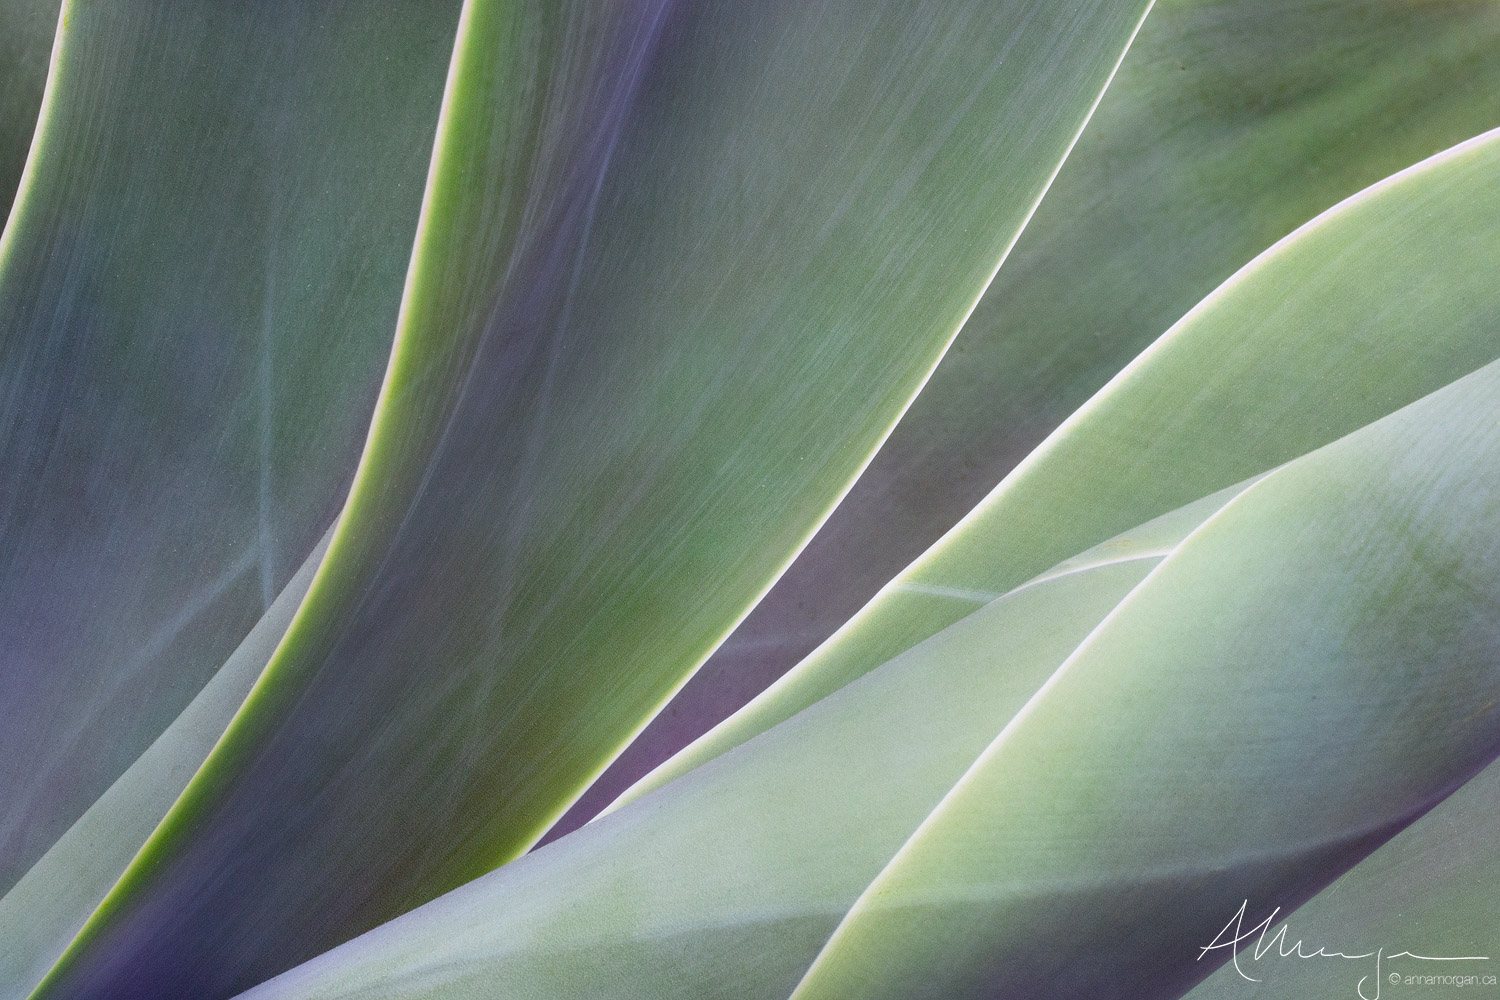 shades of colour on an agave plant in Kew Gardens, London